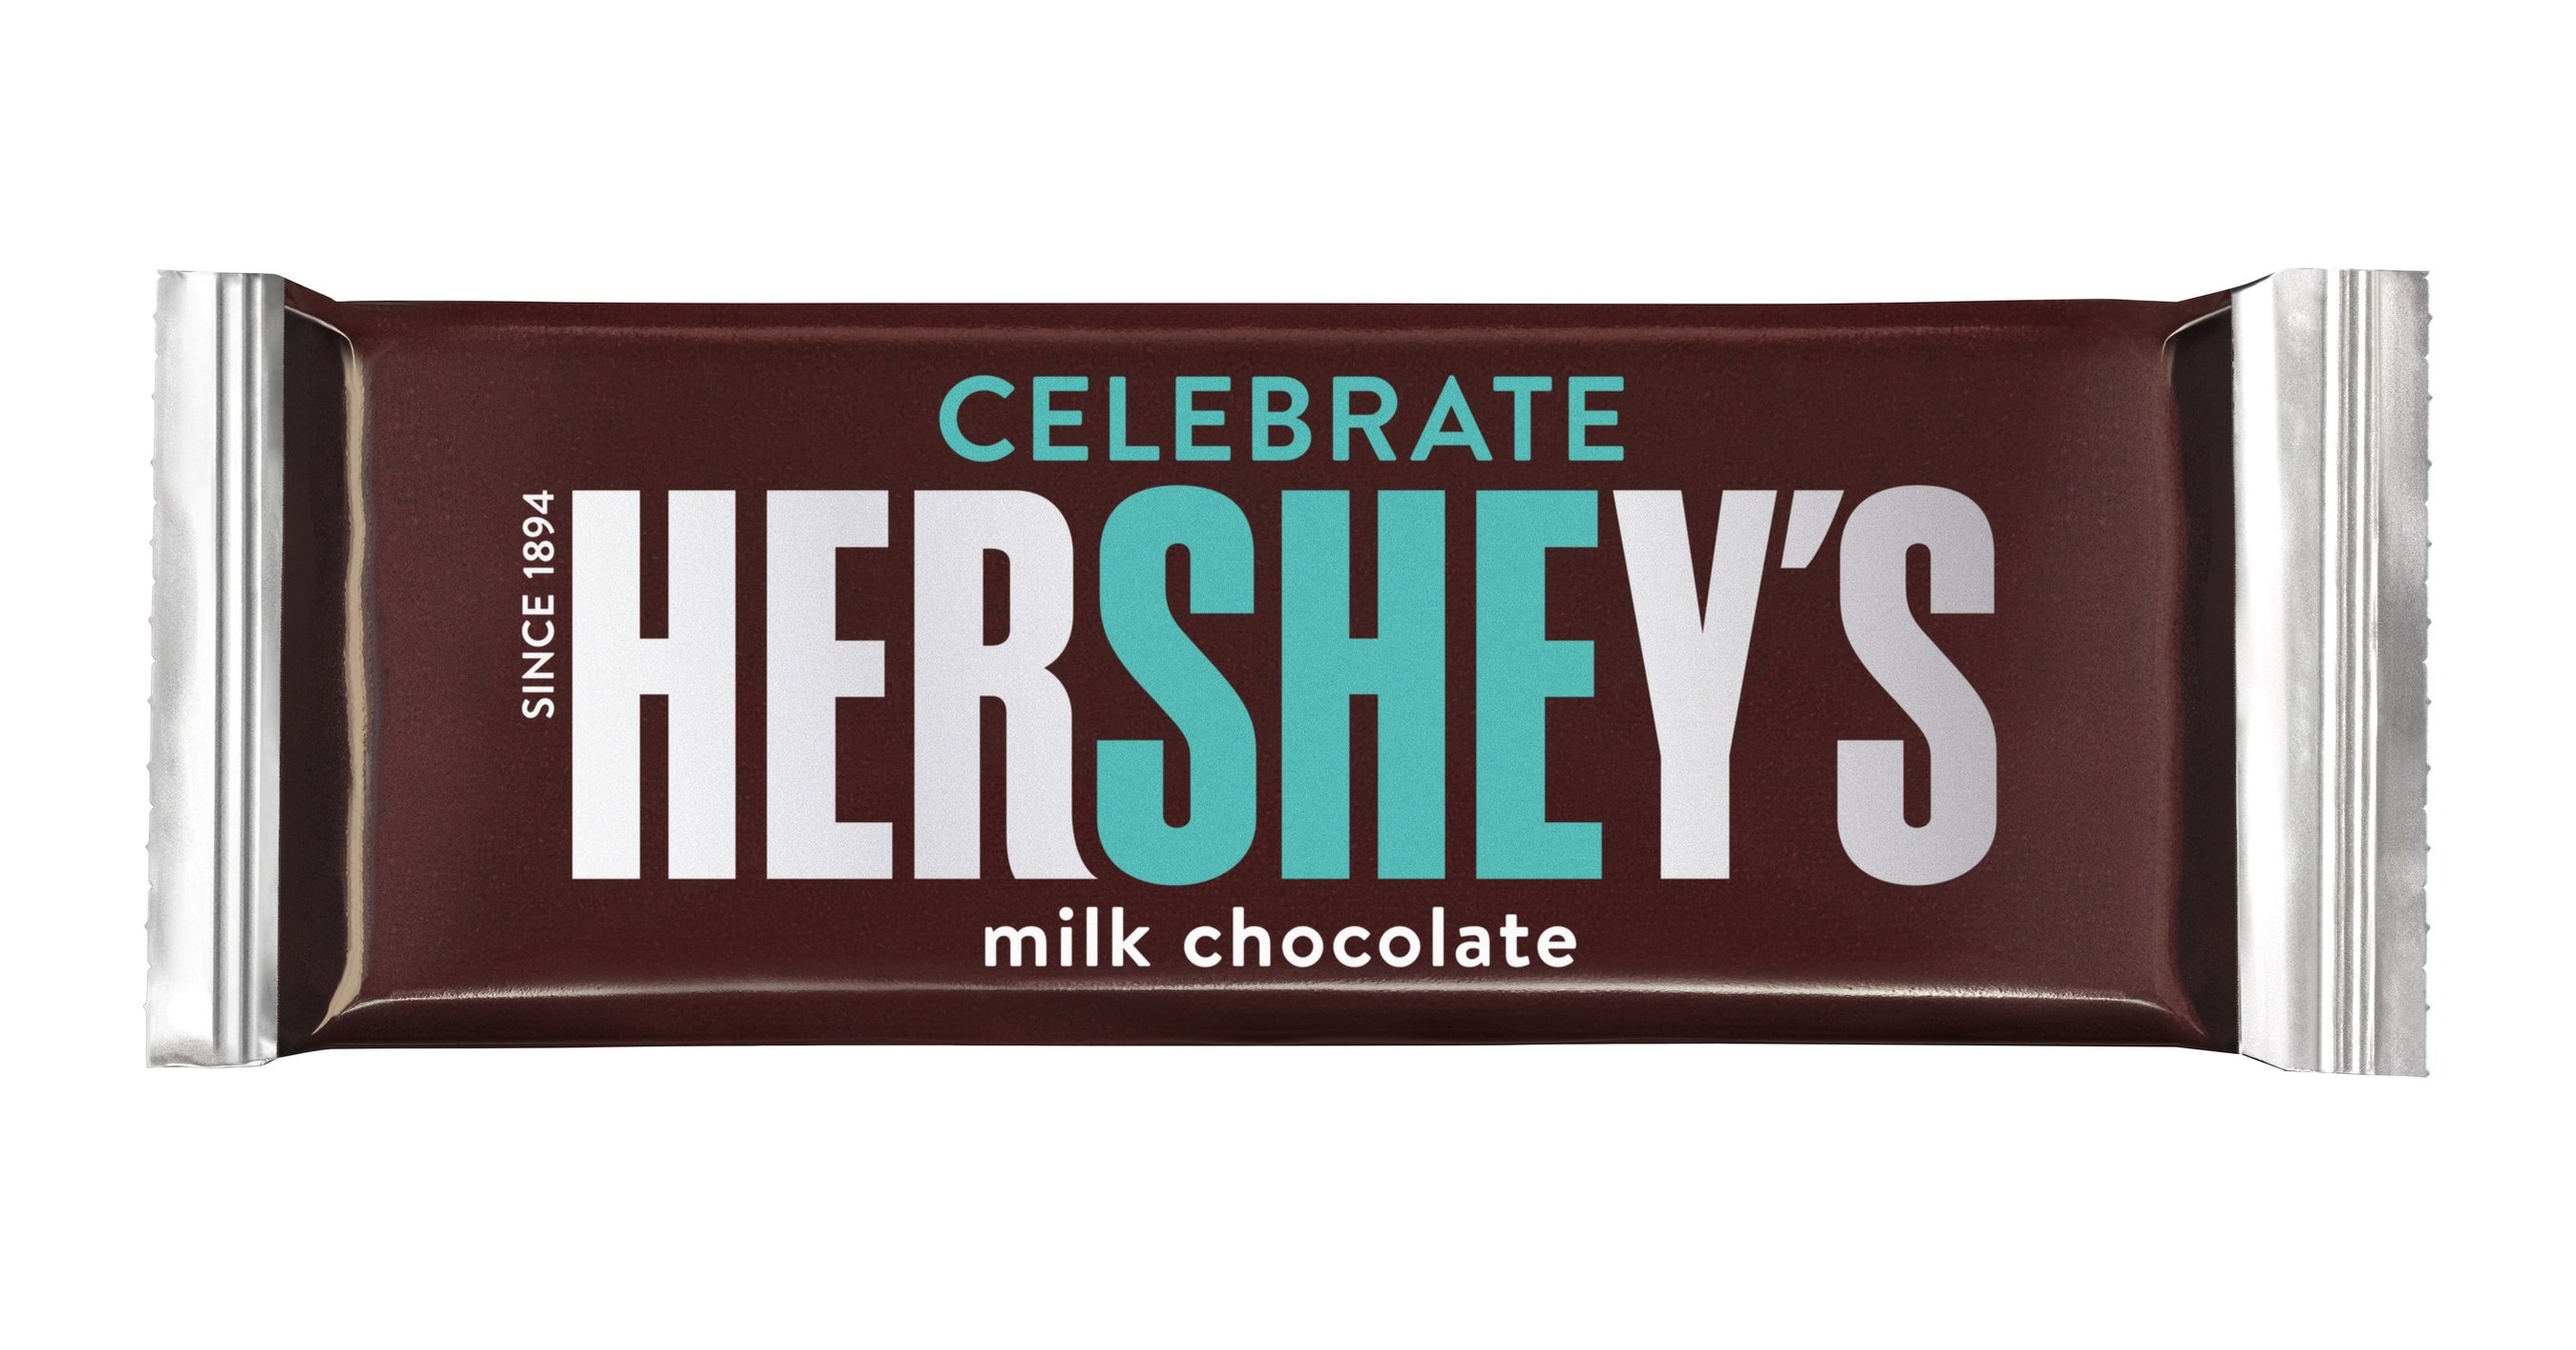 What Are The Dimensions Of A Full Size Hershey Bar Wrapper